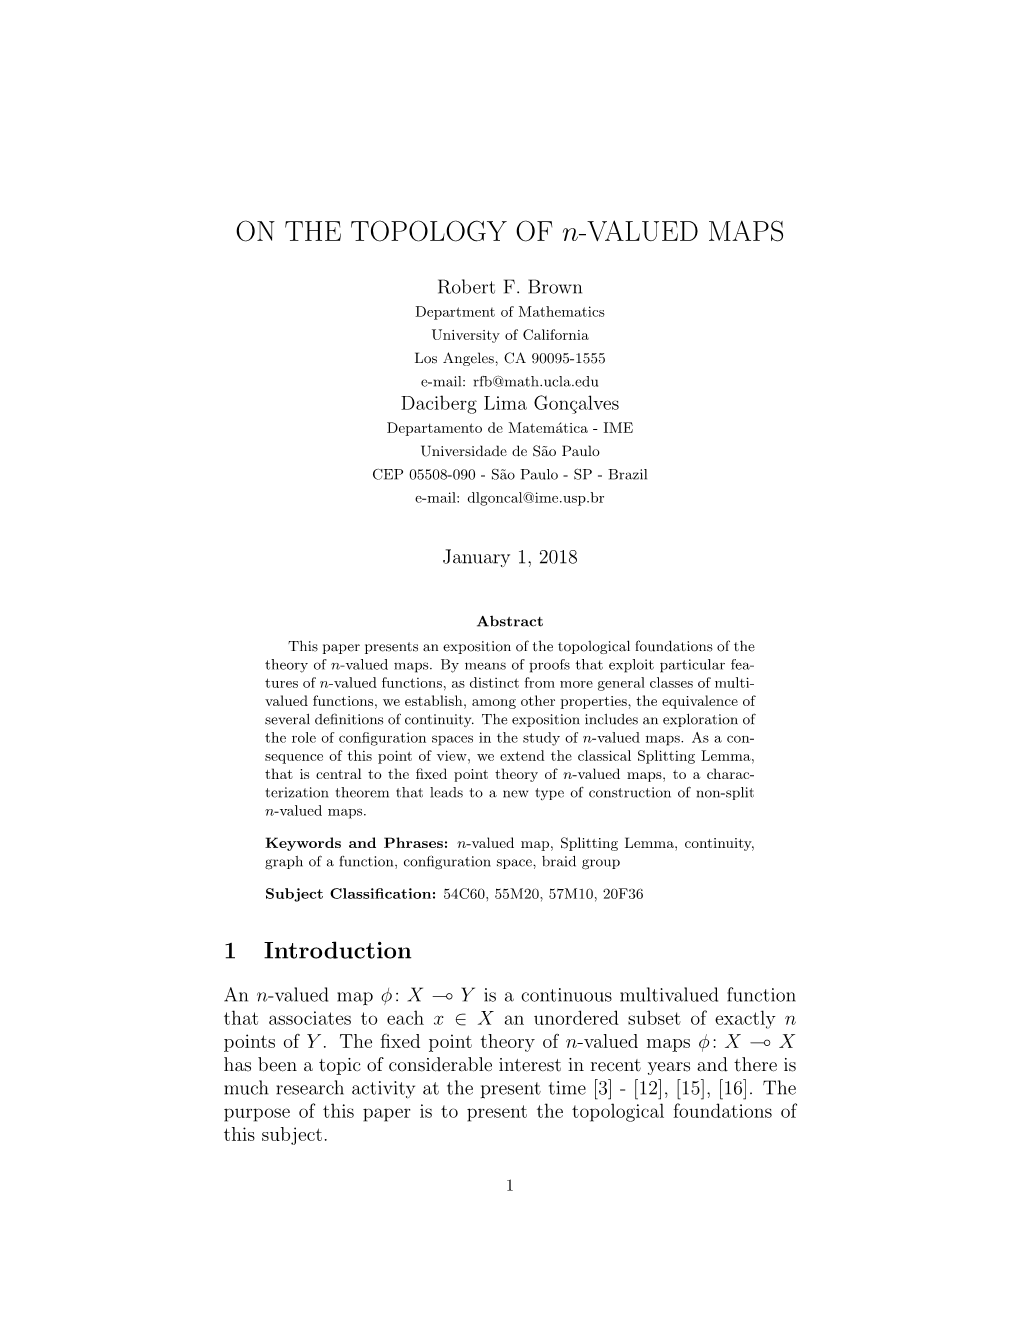 ON the TOPOLOGY of N-VALUED MAPS